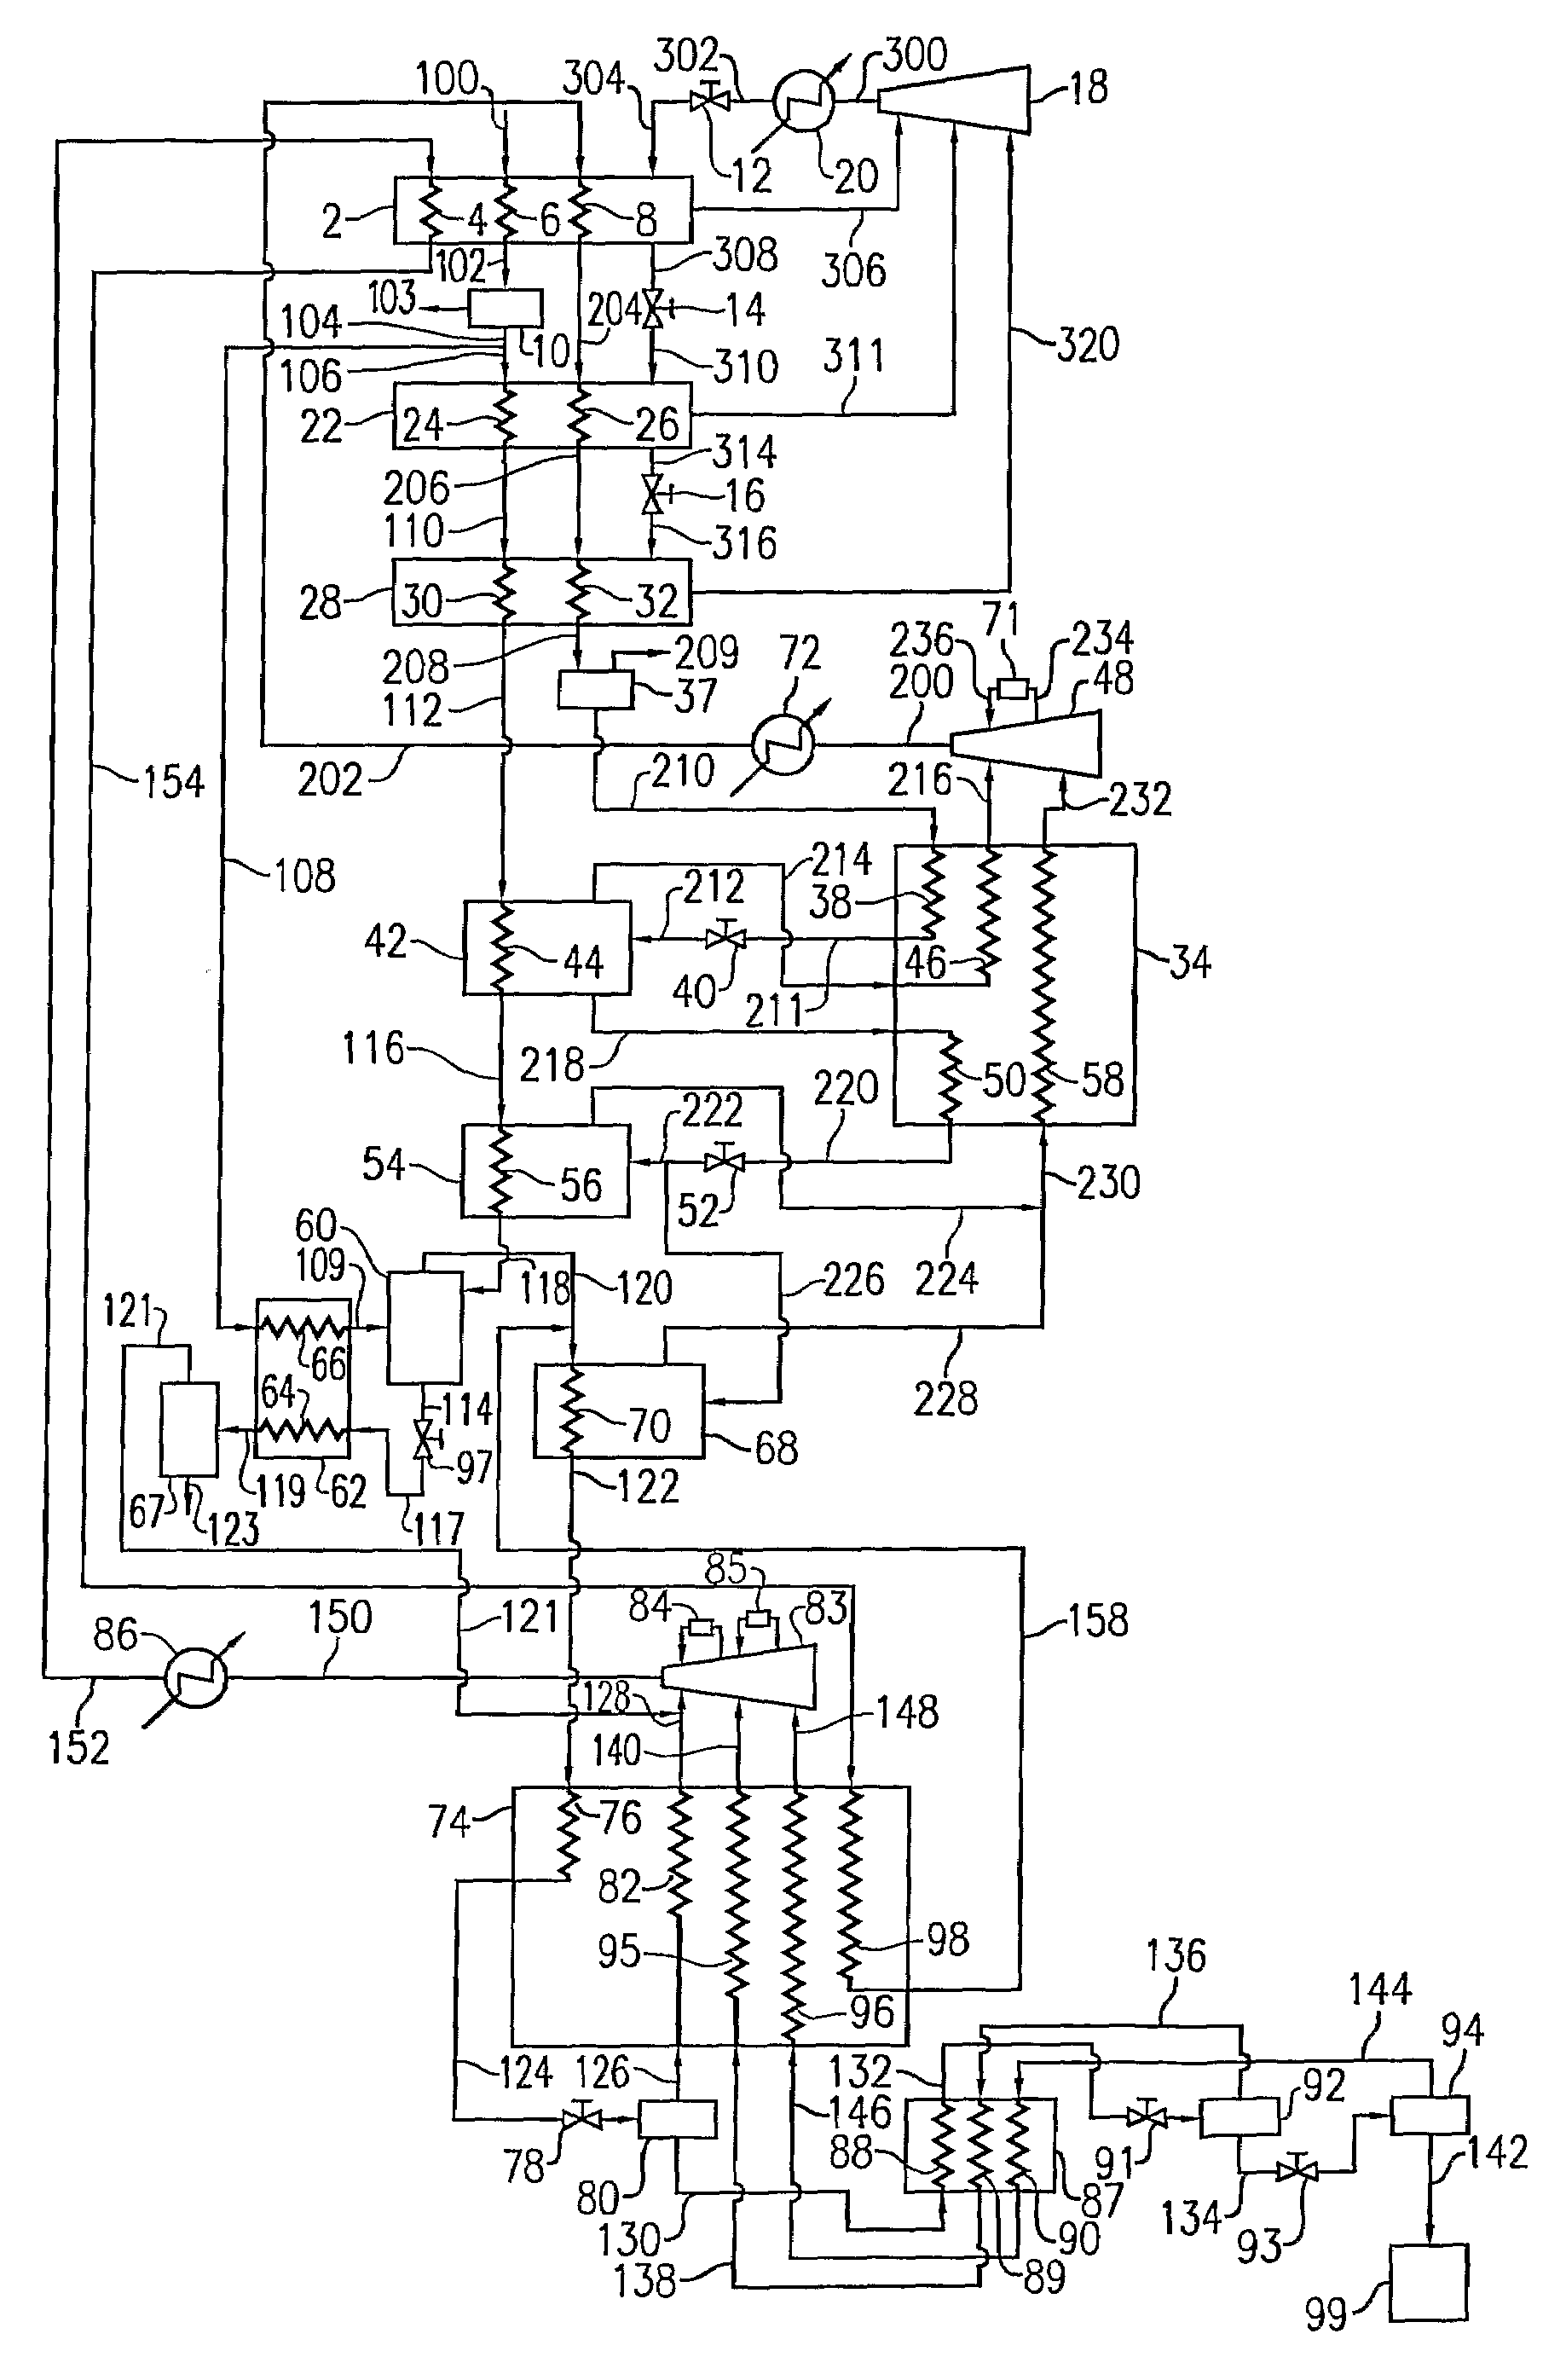 LNG system with enhanced pre-cooling cycle